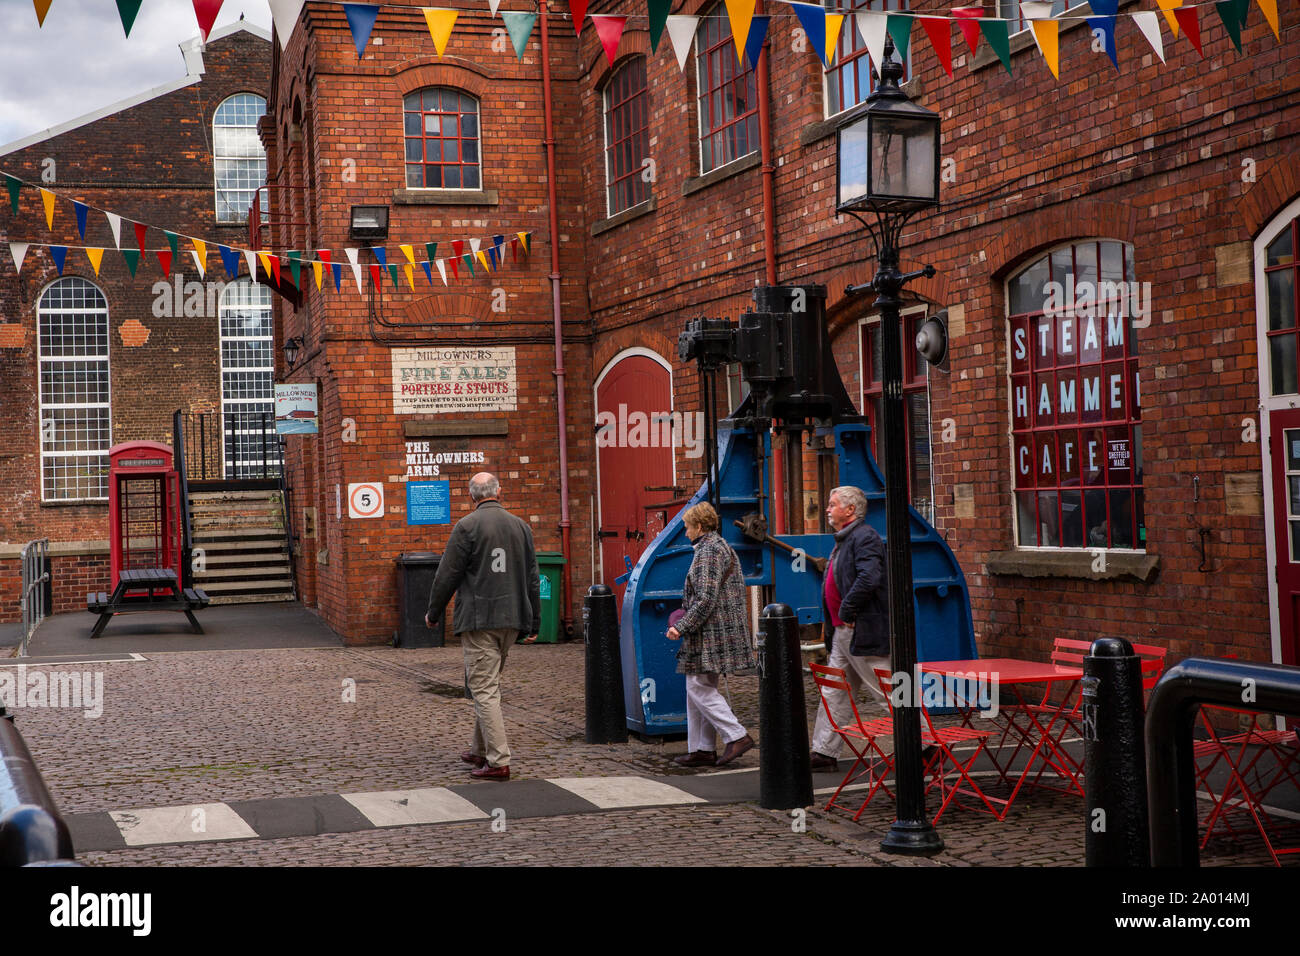 UK, Yorkshire, Sheffield, Kelham Island Museum, visitors in courtyard at Steam Hammer Cafe Stock Photo